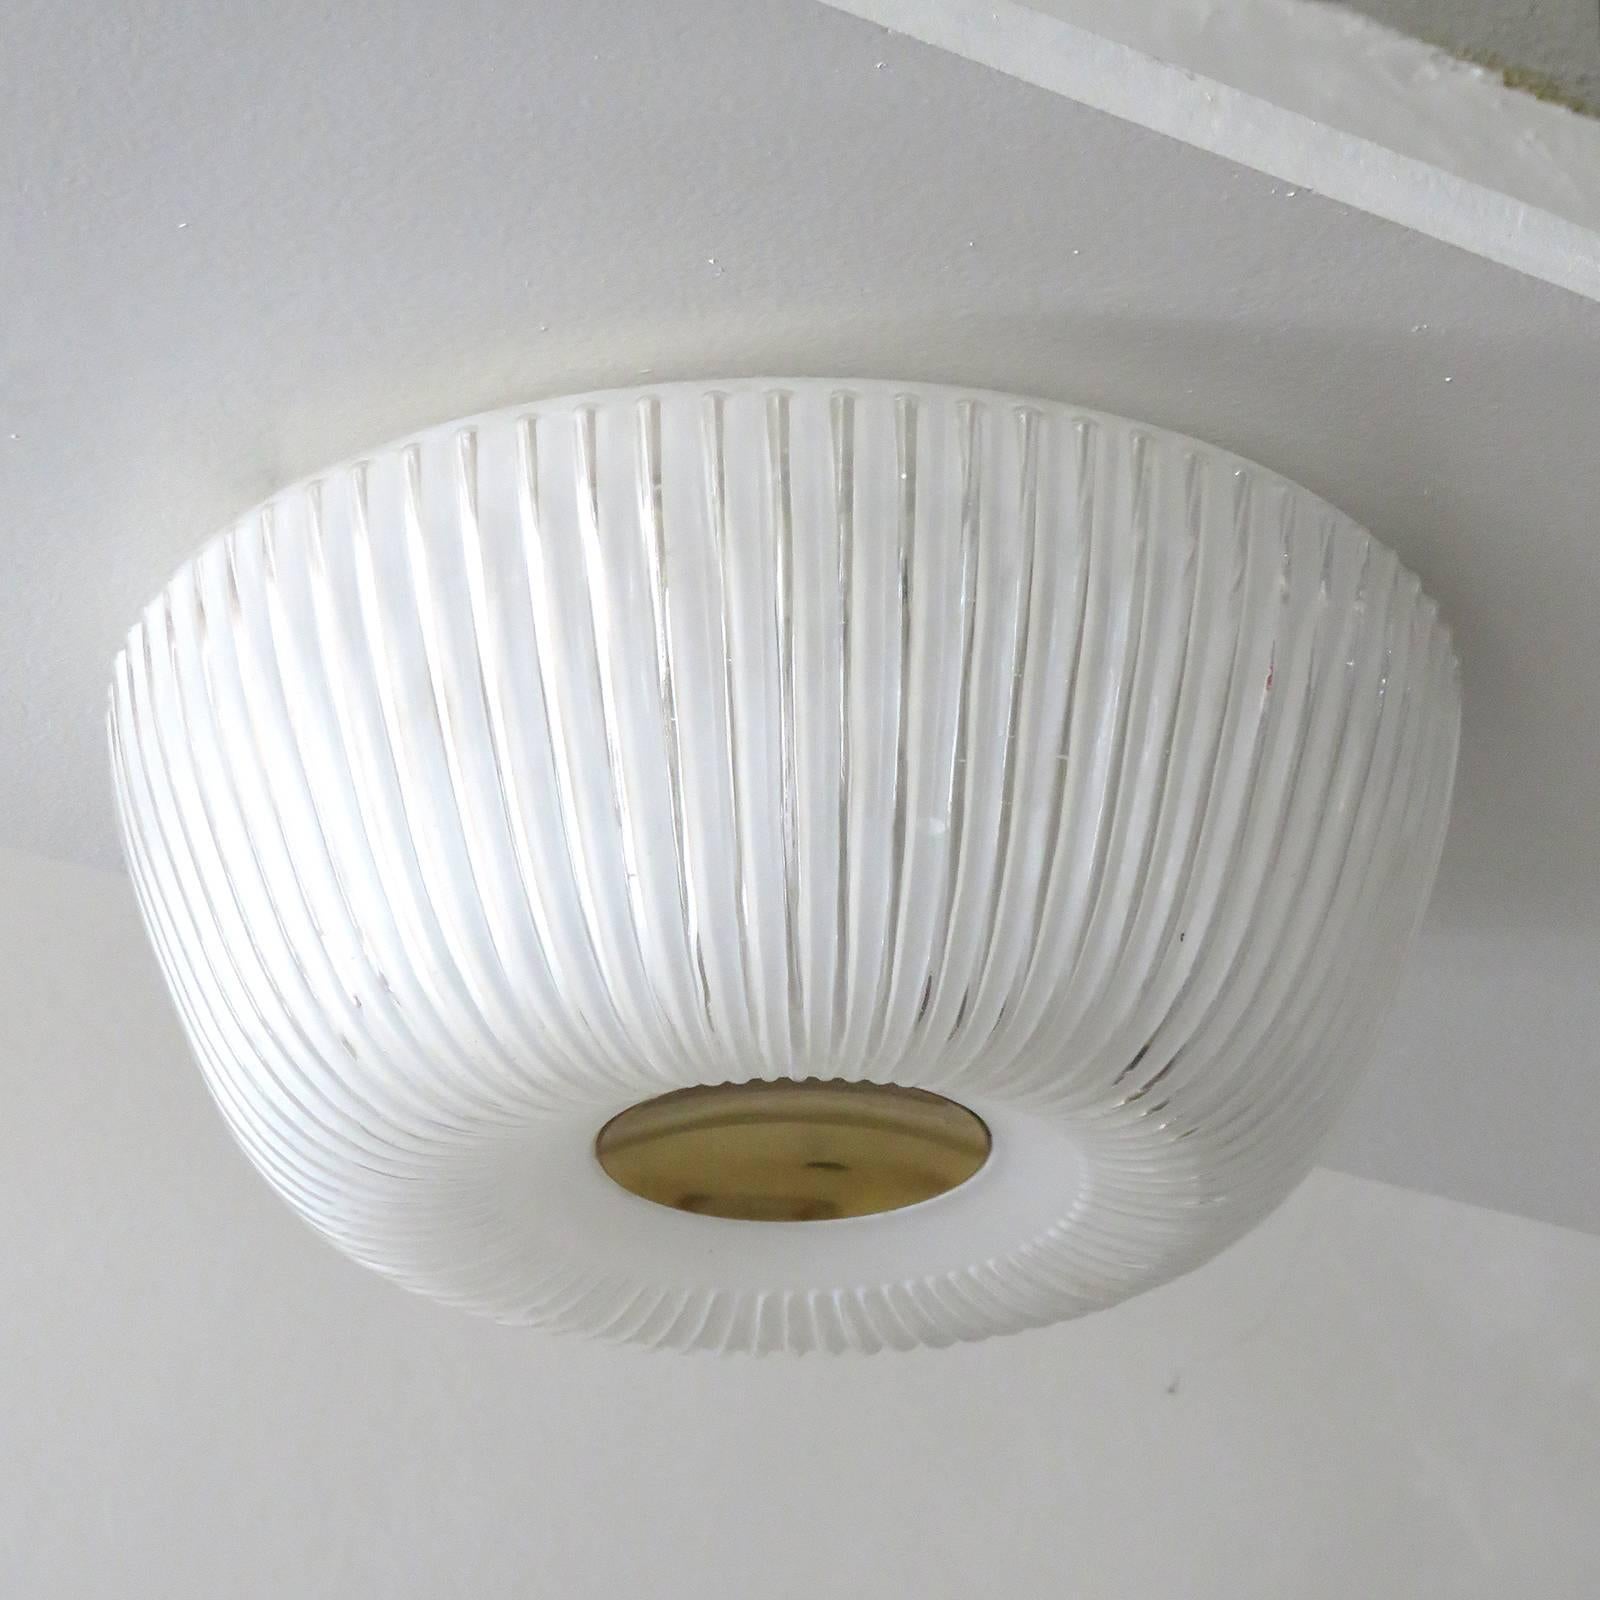 Elegant, textured glass ceiling flush mount by Doria Leuchten Germany with a circular brass center and organically shaped Minimalist glass body, marked.